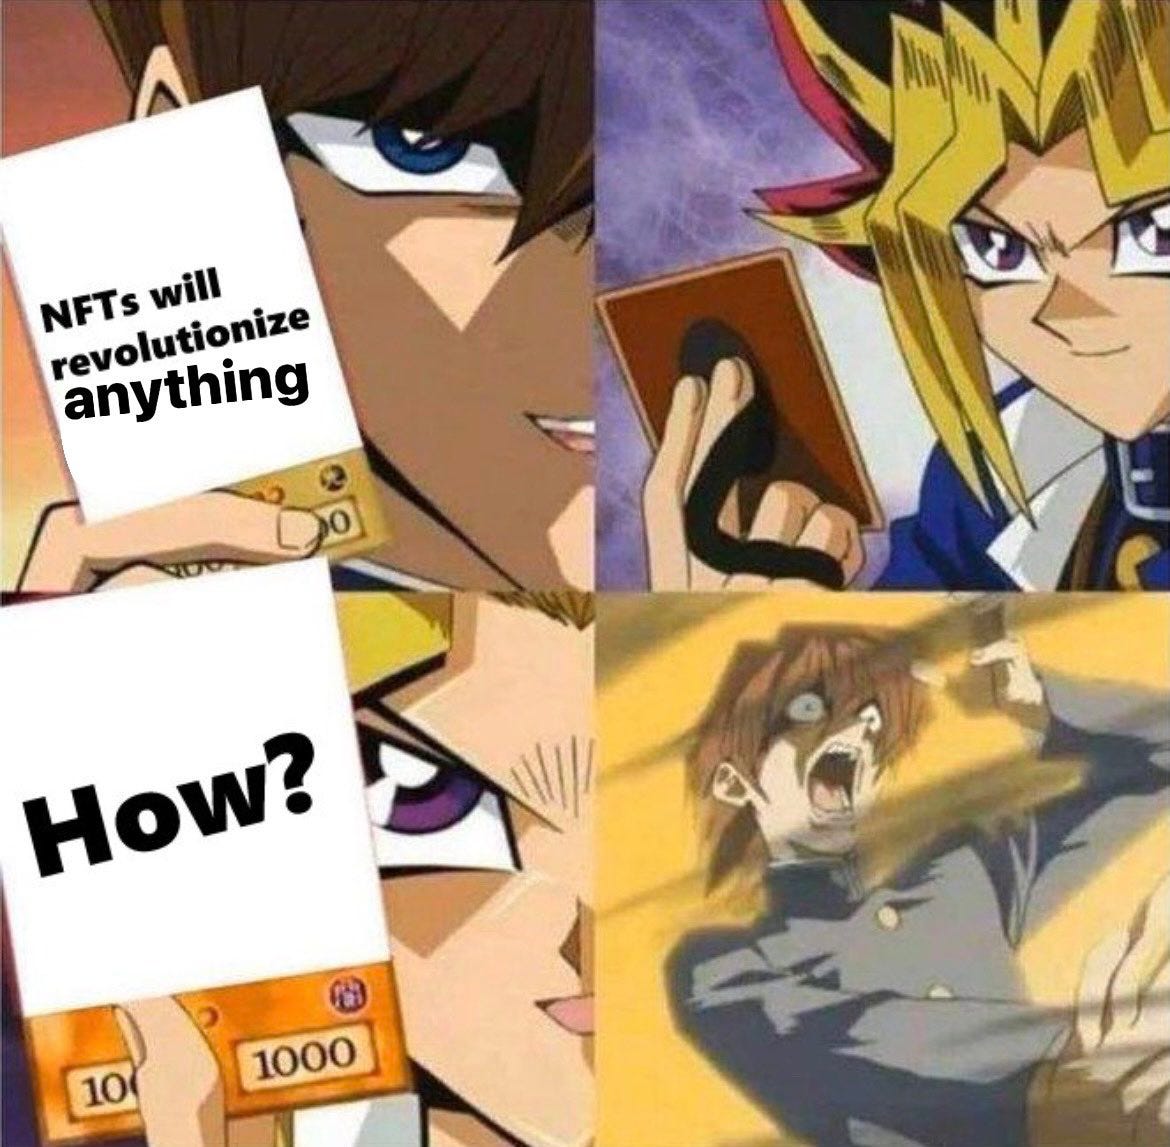 A meme from Dragon Ball Z: one character holds up a card that reads "NFTs will revolutionize anything." Second panel: another character looks smug. Third panel: the second character holds up a card that reads "How?' Fourth panel: the first character is thrown back in shock.